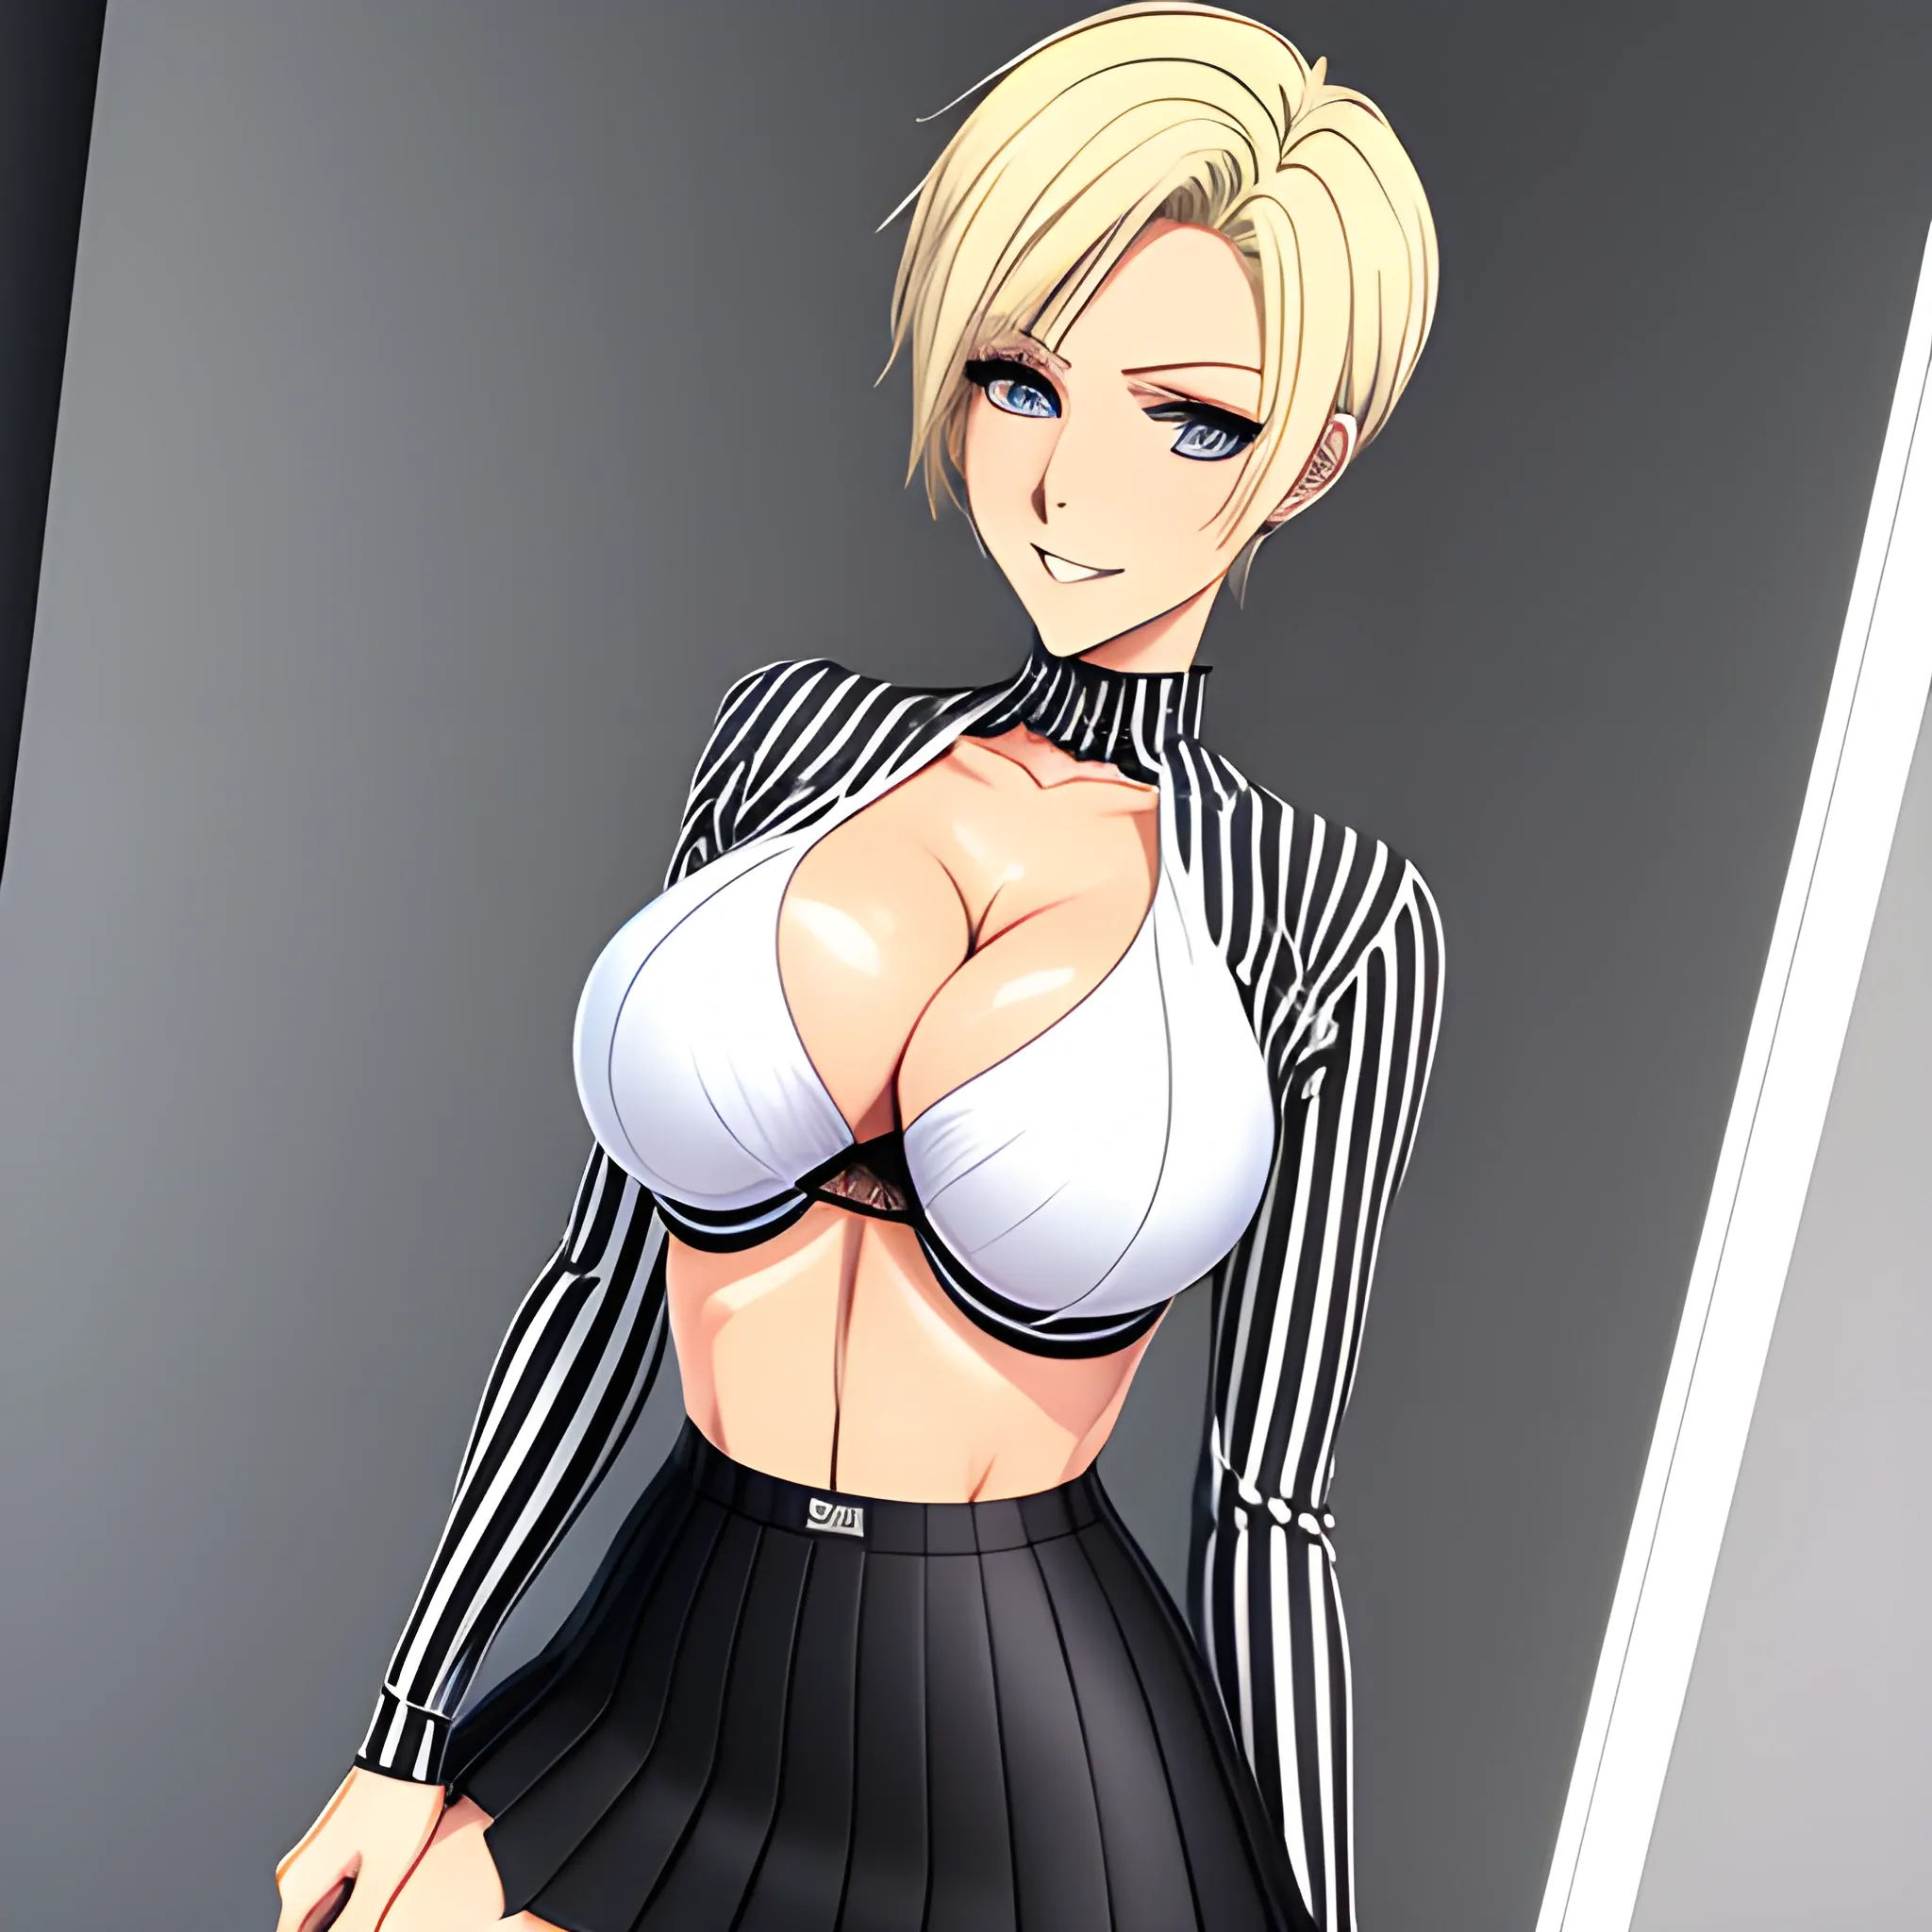 1 girl, short blonde hair, blue eyes, pierced left eyebrow, D-cup breasts, wide hips, toned thighs, six pack, white long-sleeved top with black stripes mid-length, black skirt, black pantyhose, black sneakers, anime style